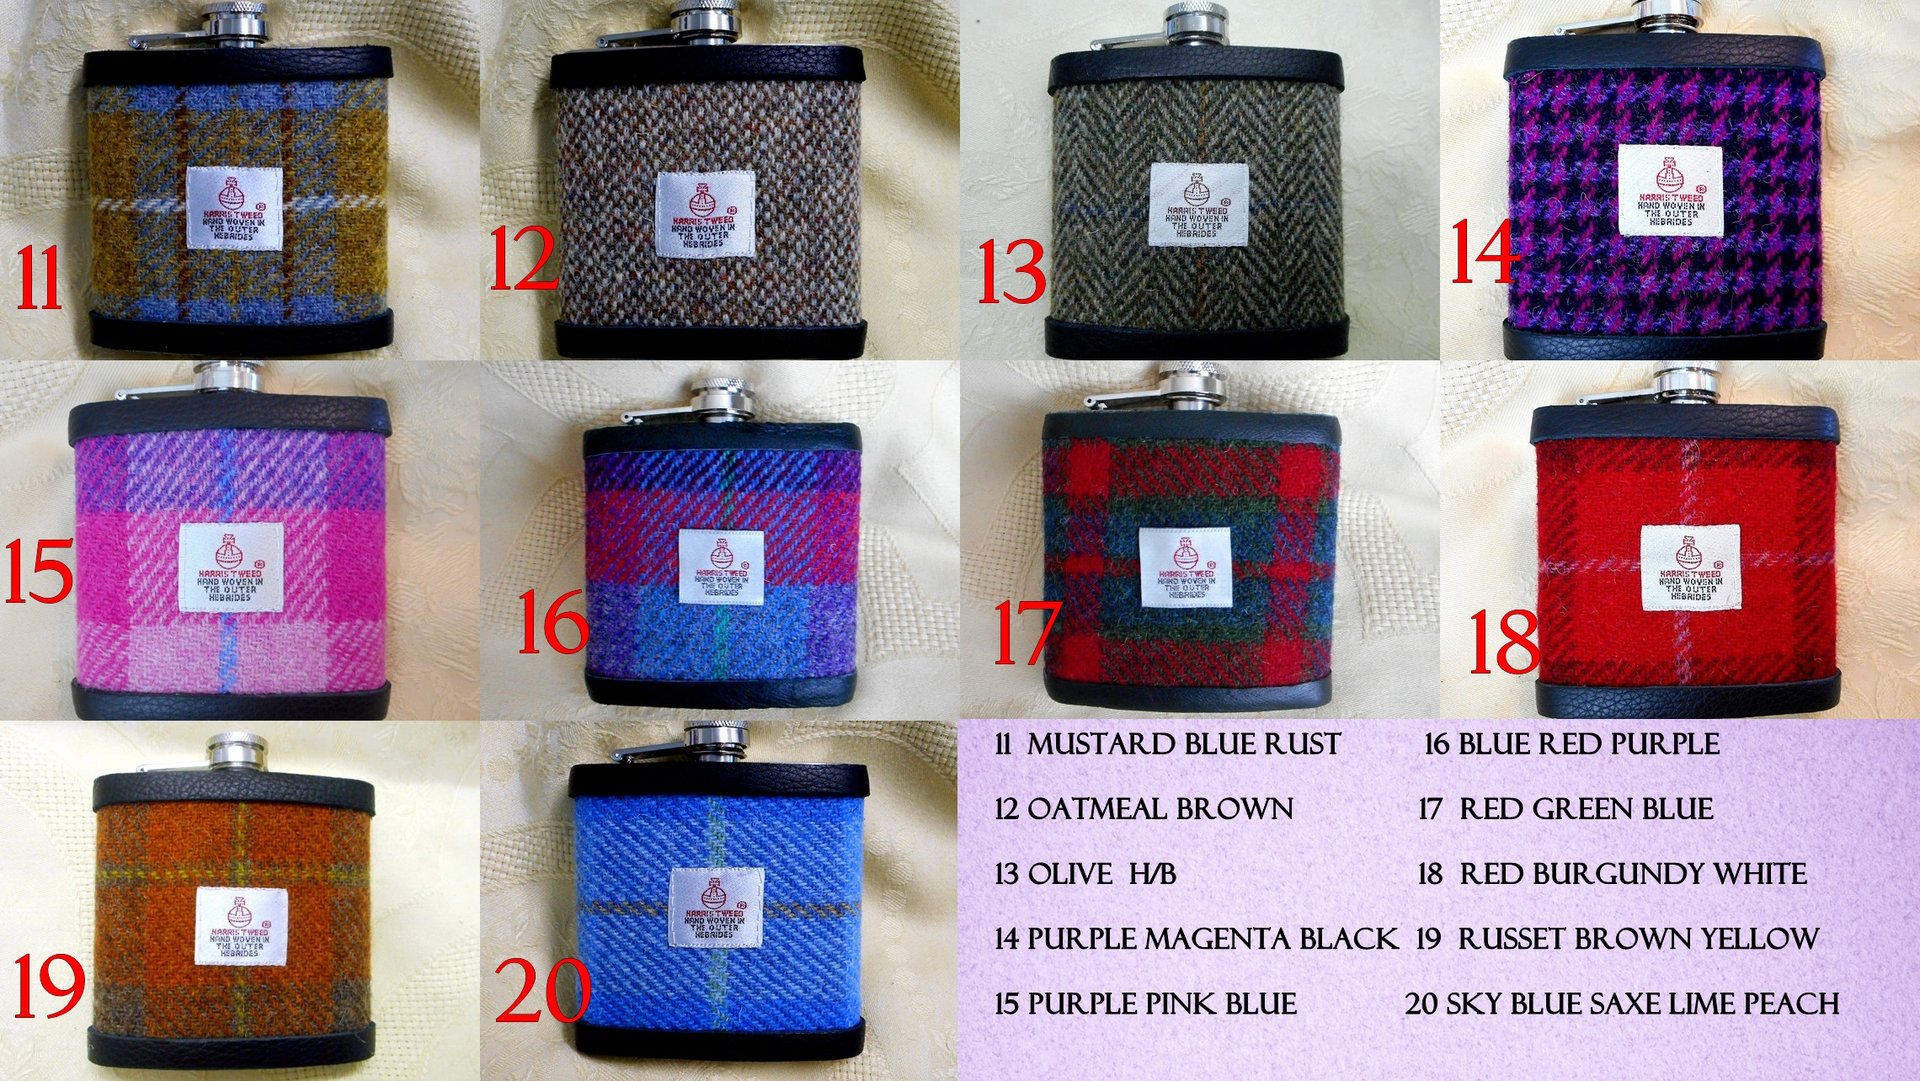 Personalised Harris Tweed hip flask with name in celtic setting, Scottish luxury gift for Christmas , unique gift for birthday, retirement , monogrammed flask